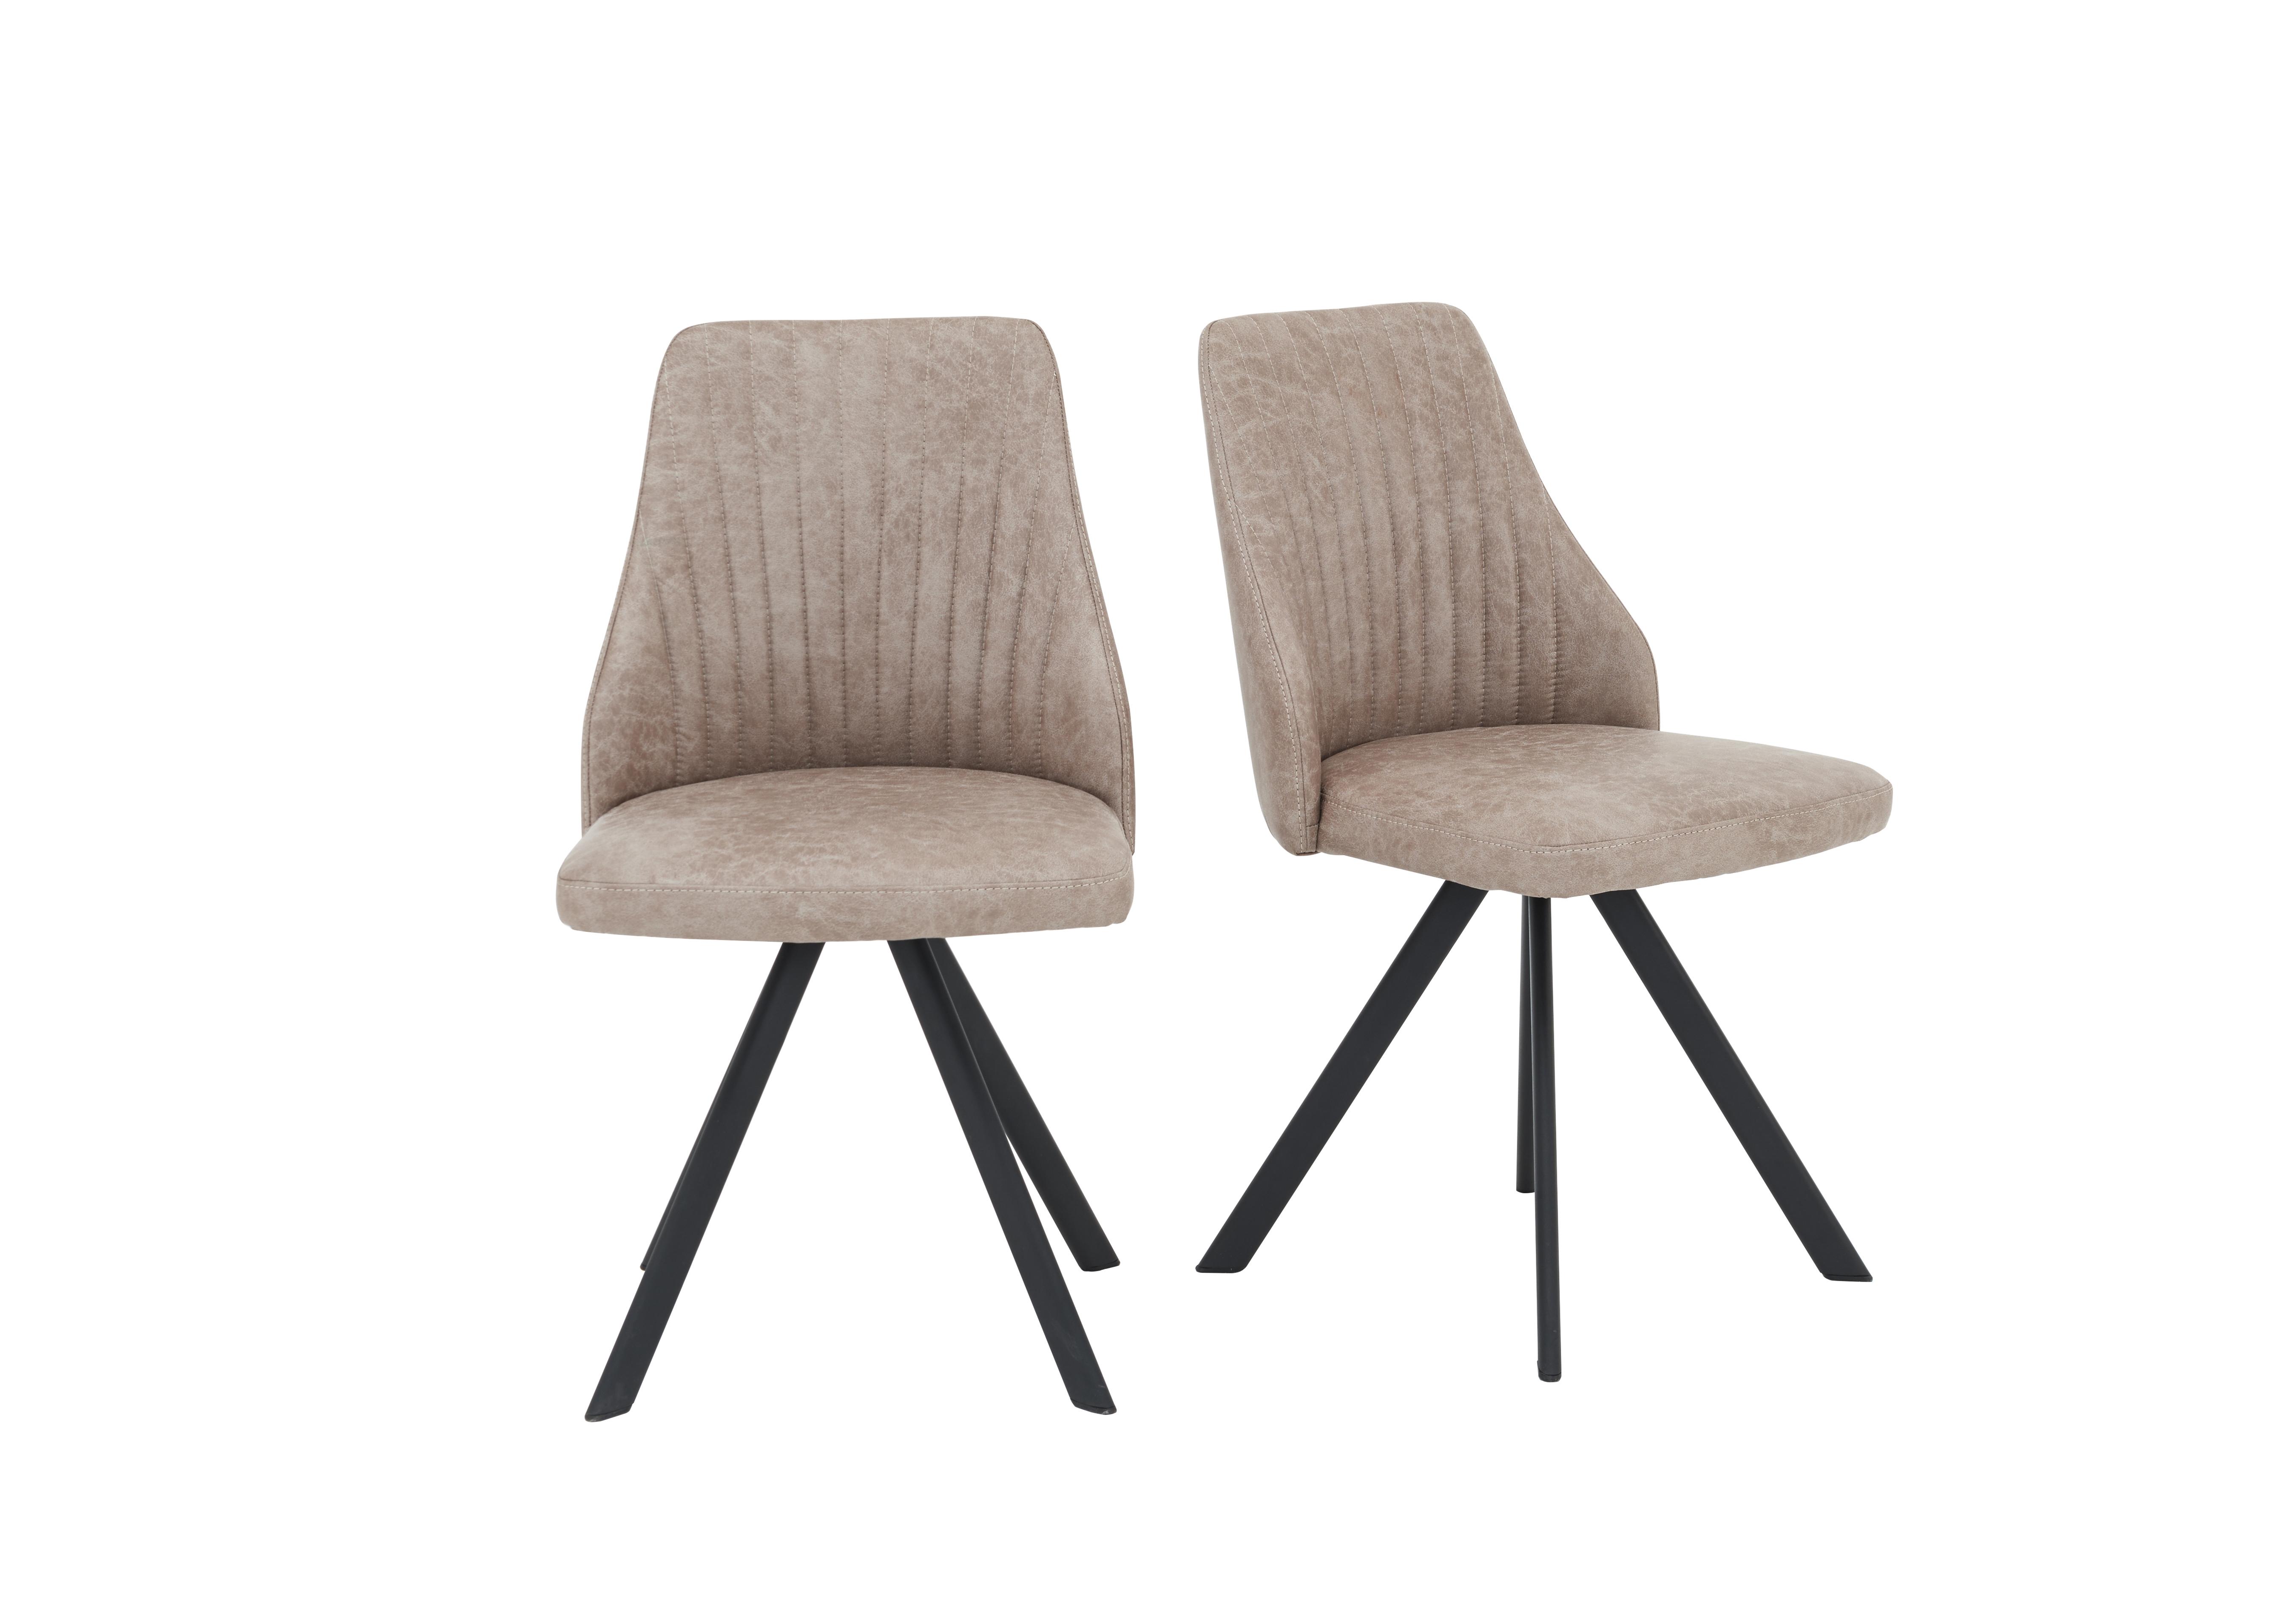 Aquila Pair of Swivel Dining Chairs in Light Grey Chairs on Furniture Village